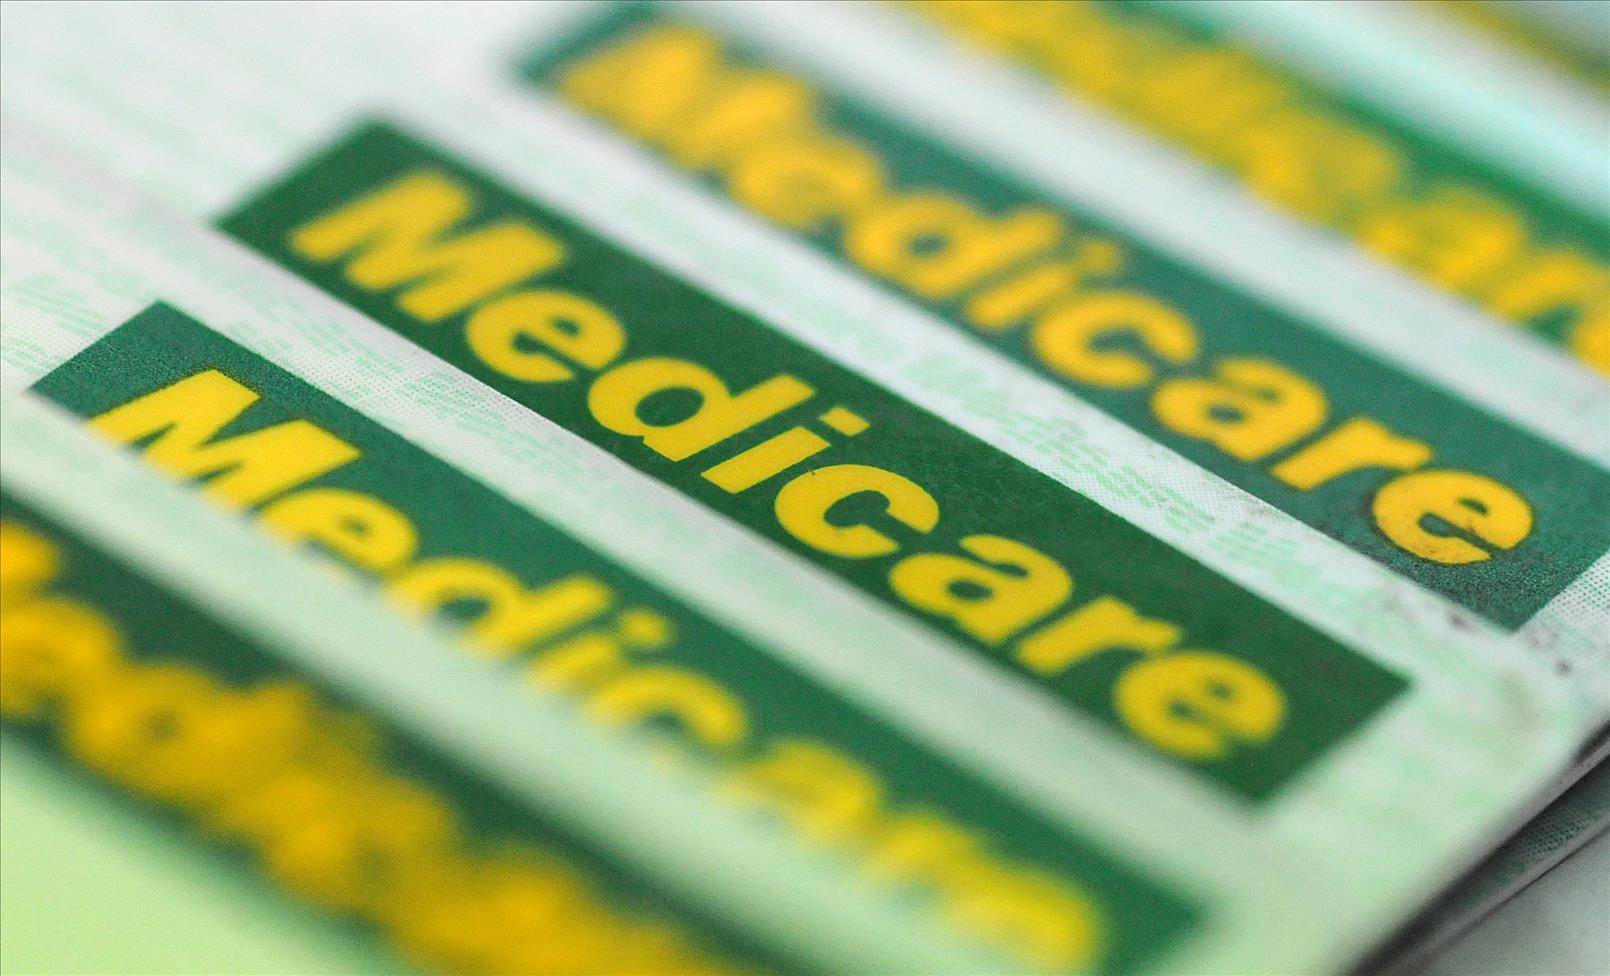 I've Given Out My Medicare Number. How Worried Should I Be About The Latest Optus Data Breach?